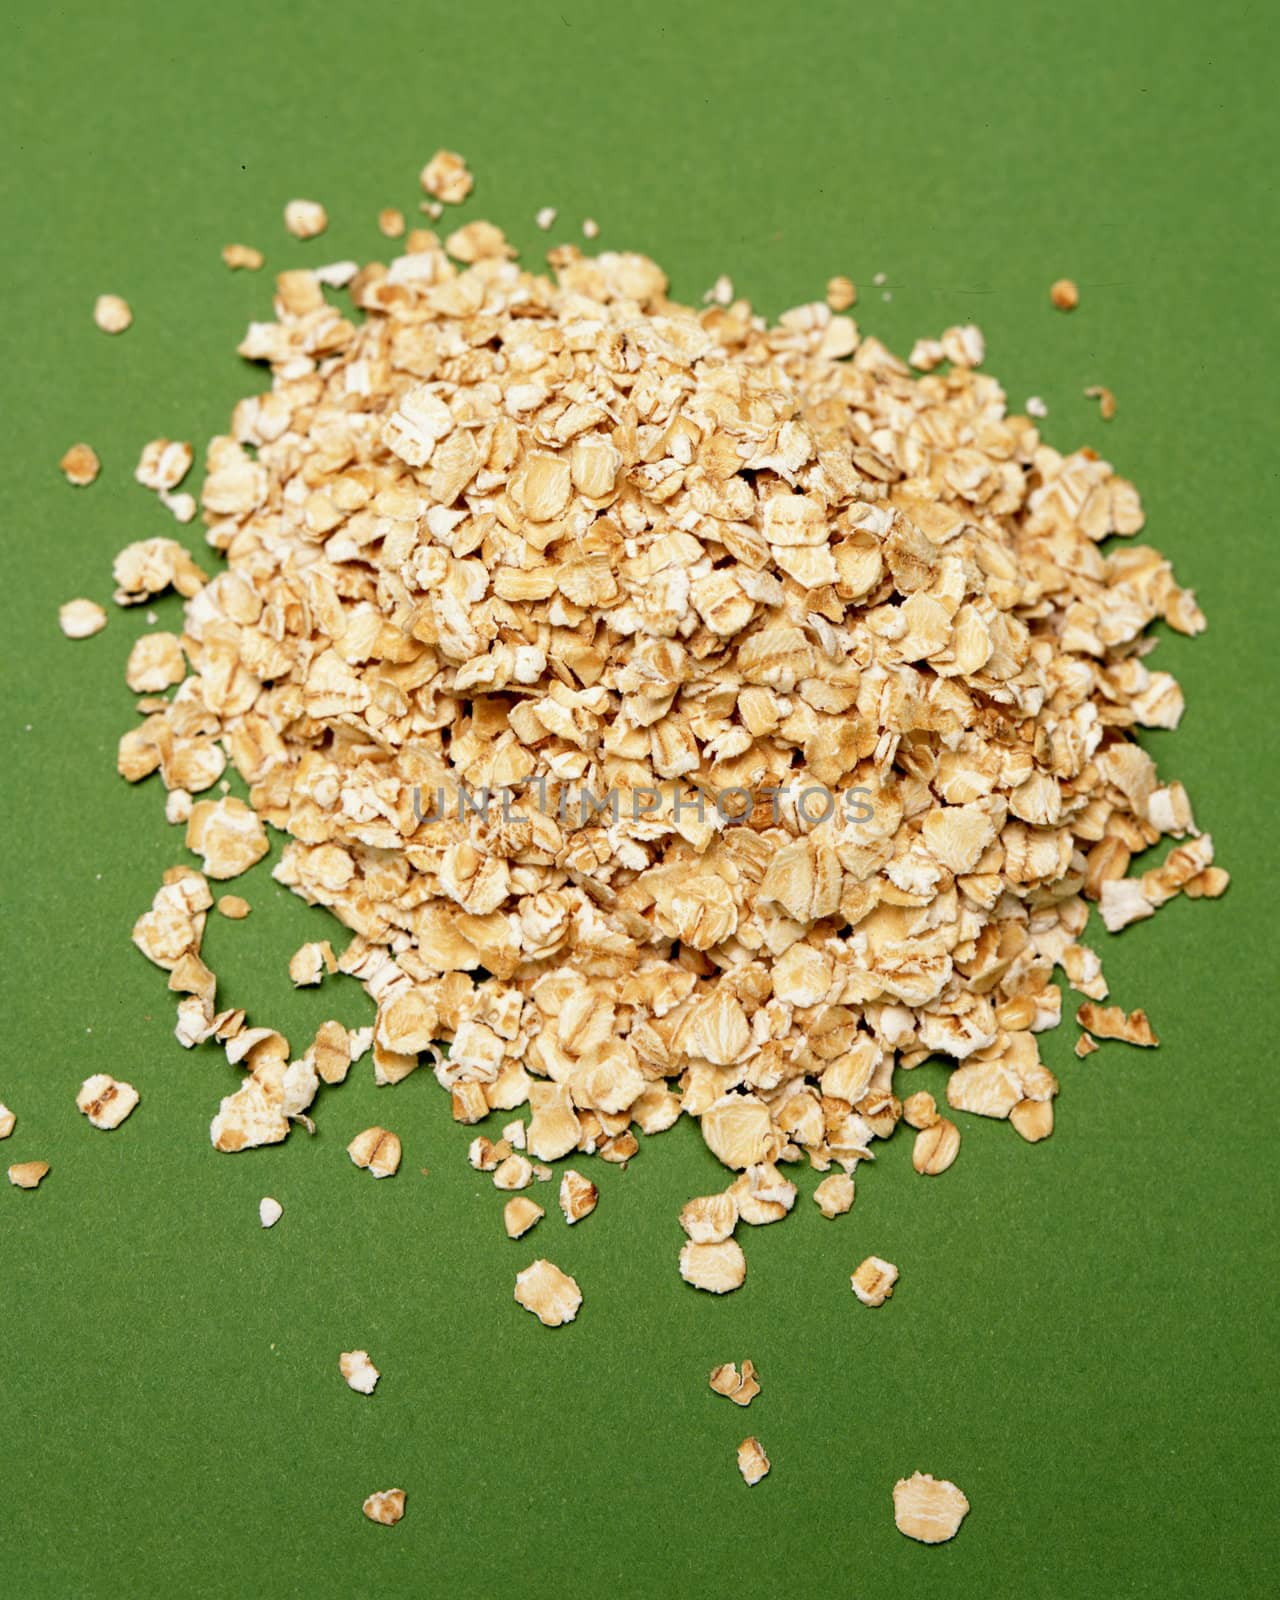 A small pile of rolled oats on green
